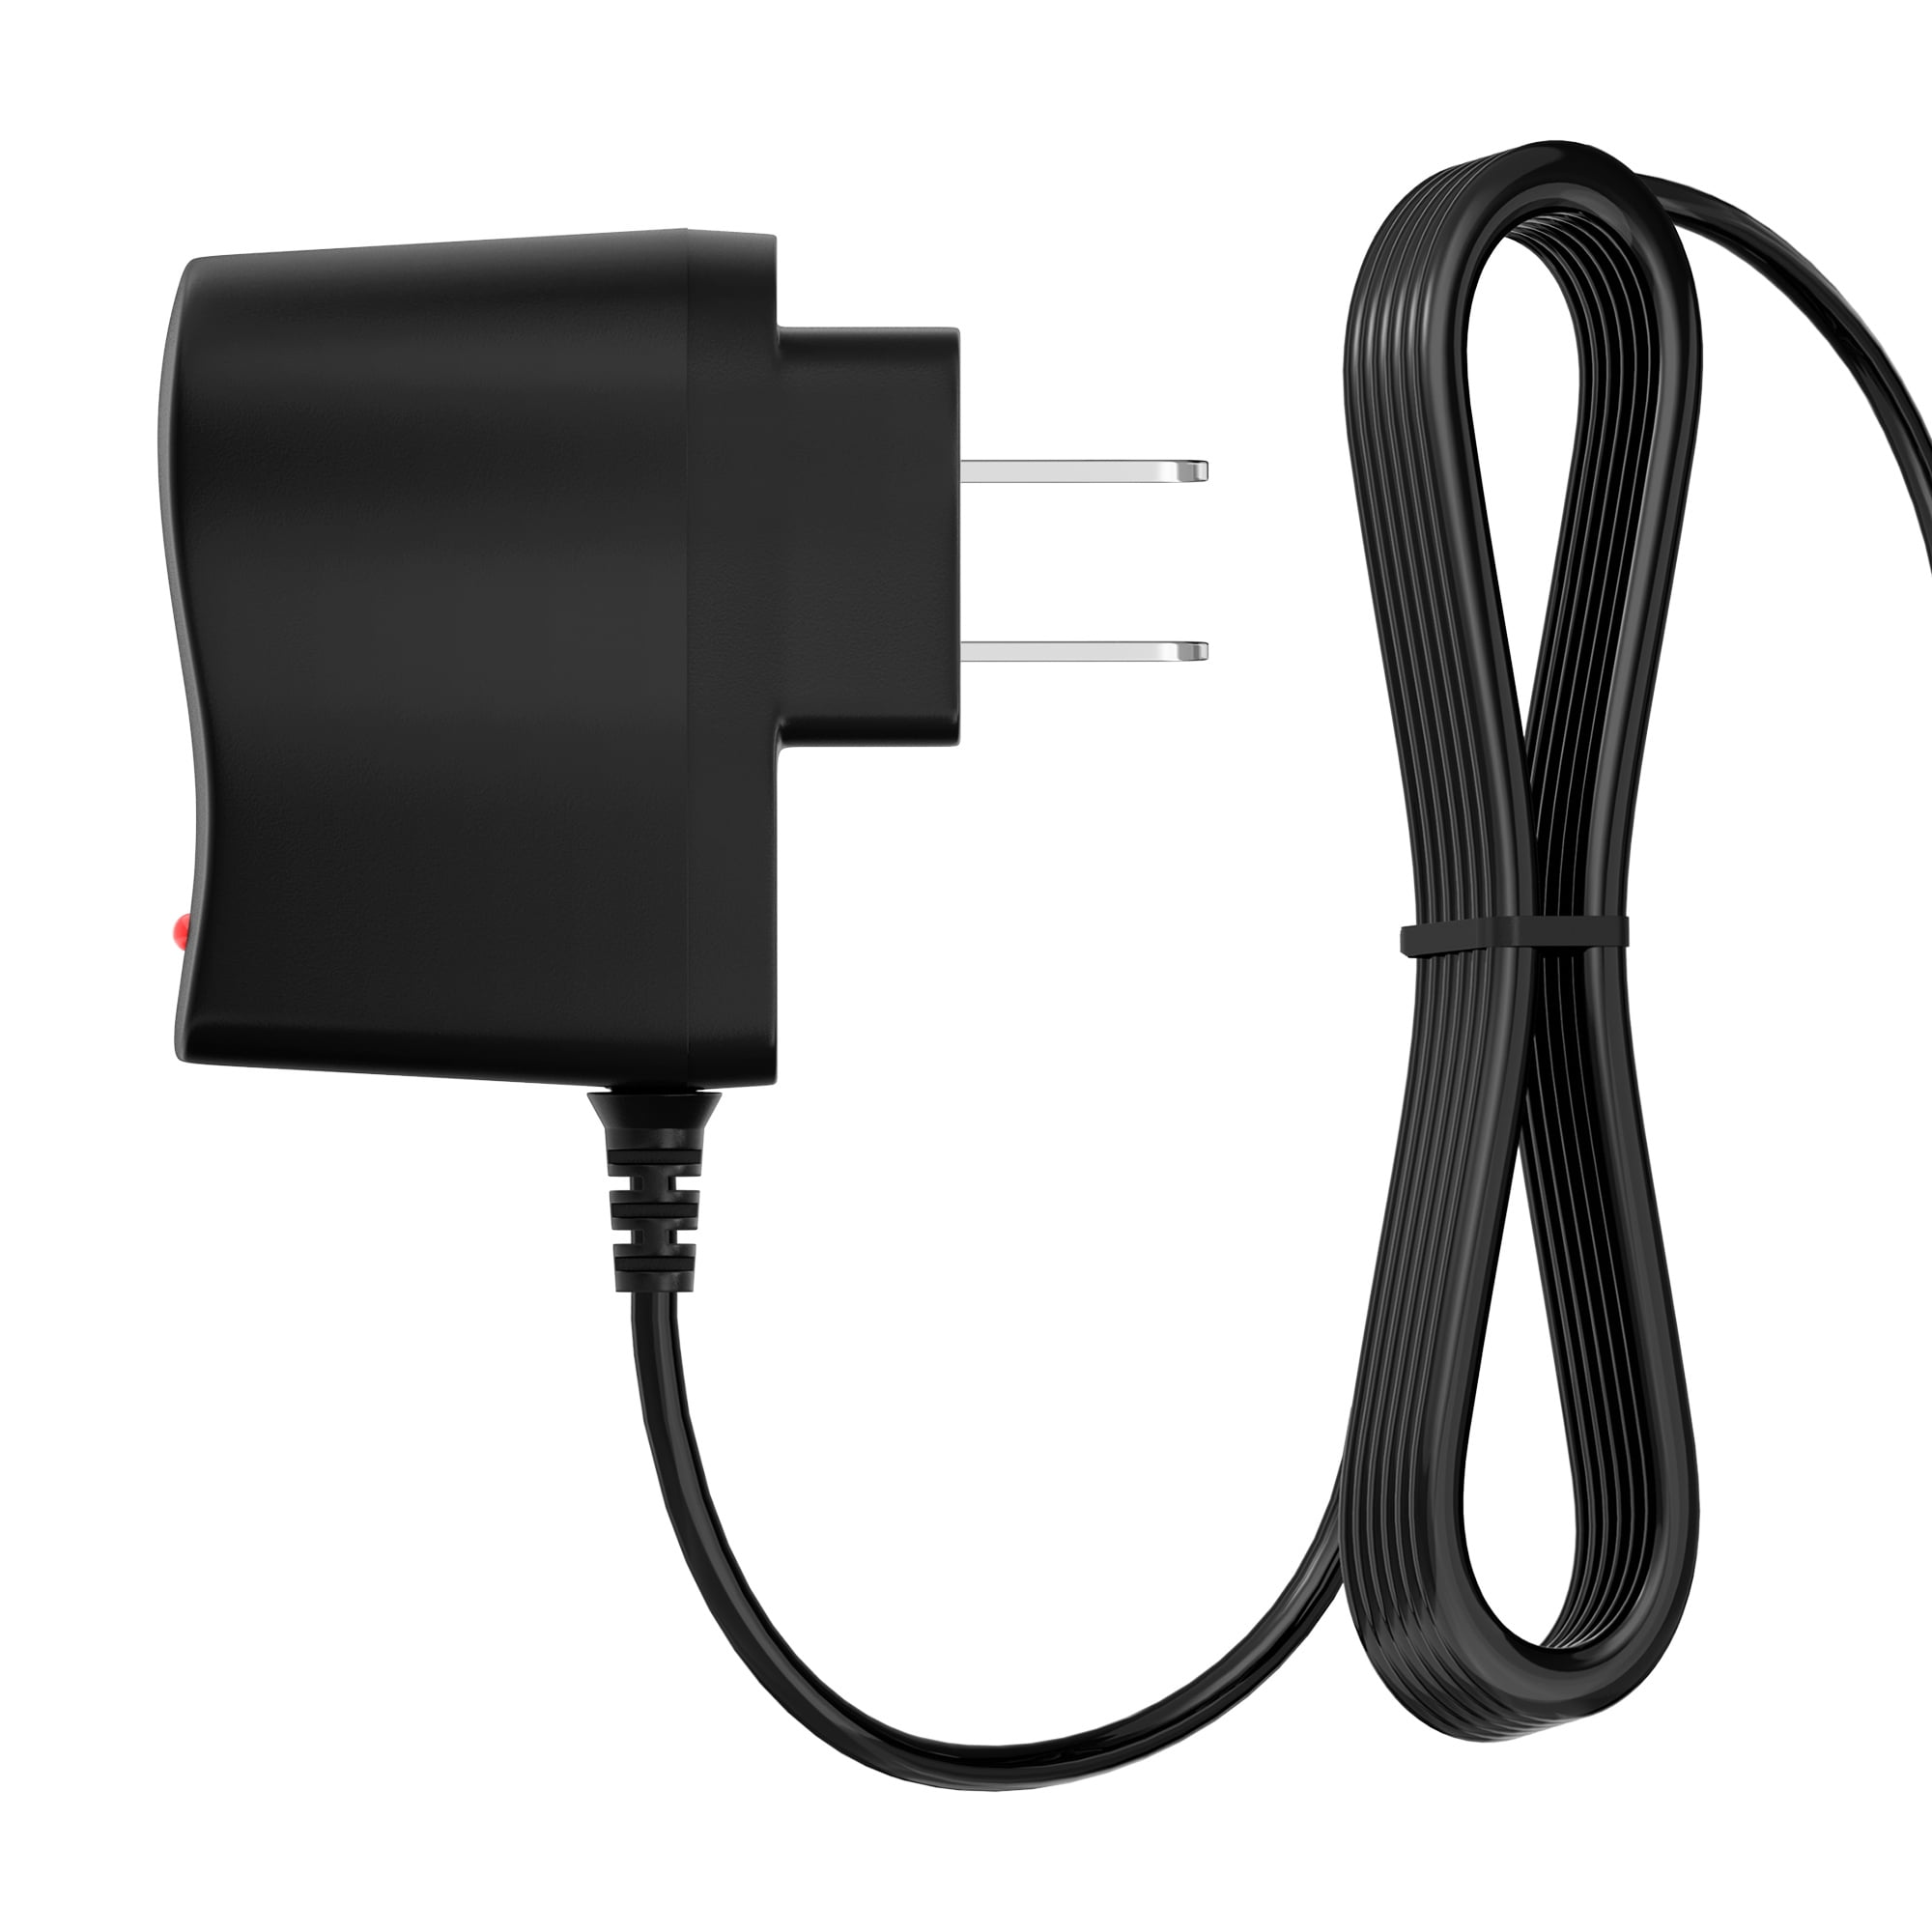 USB Charger, 5 Volt DC, 1 Amp, Wall Adapter